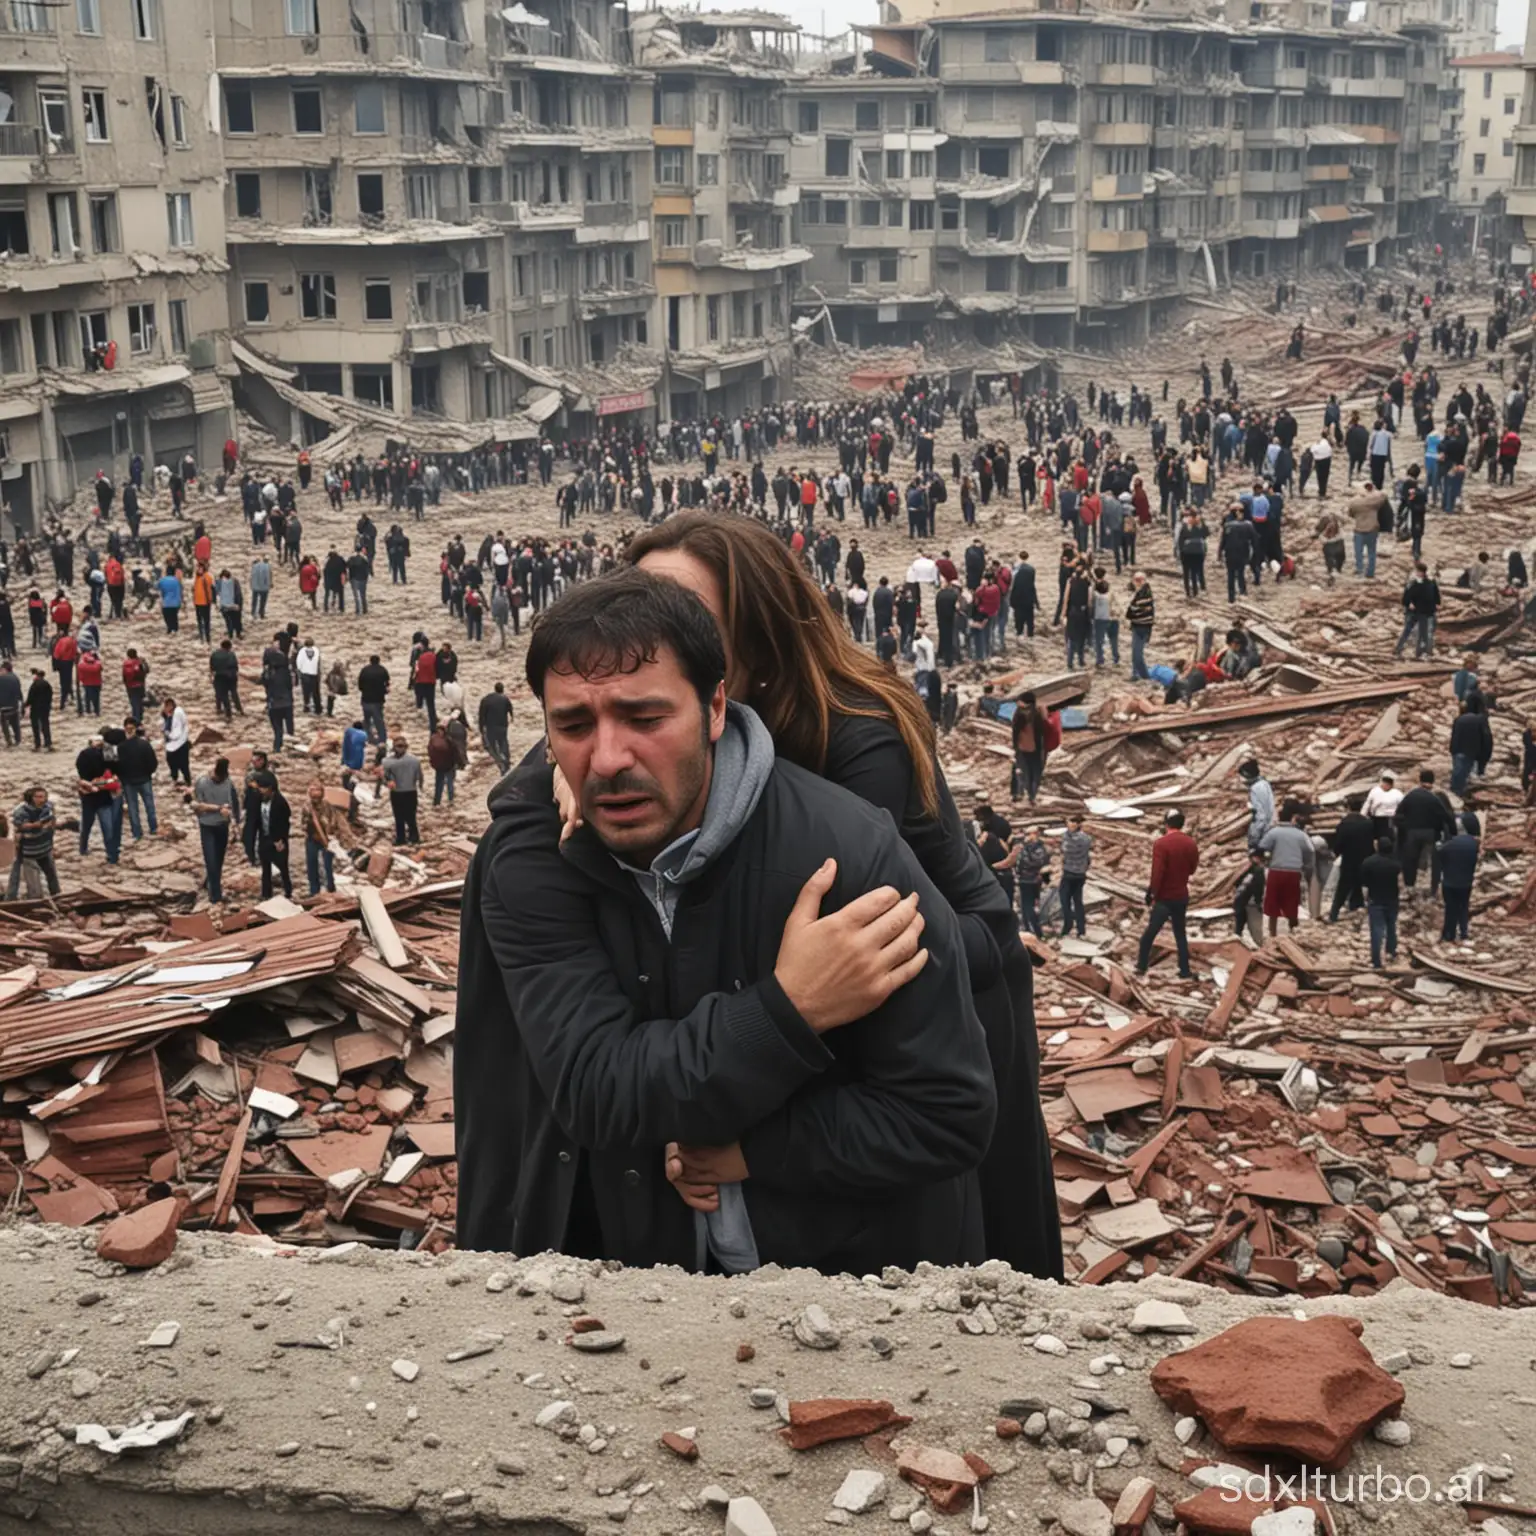 Let there be people crying among the buildings that collapsed in Istanbul.